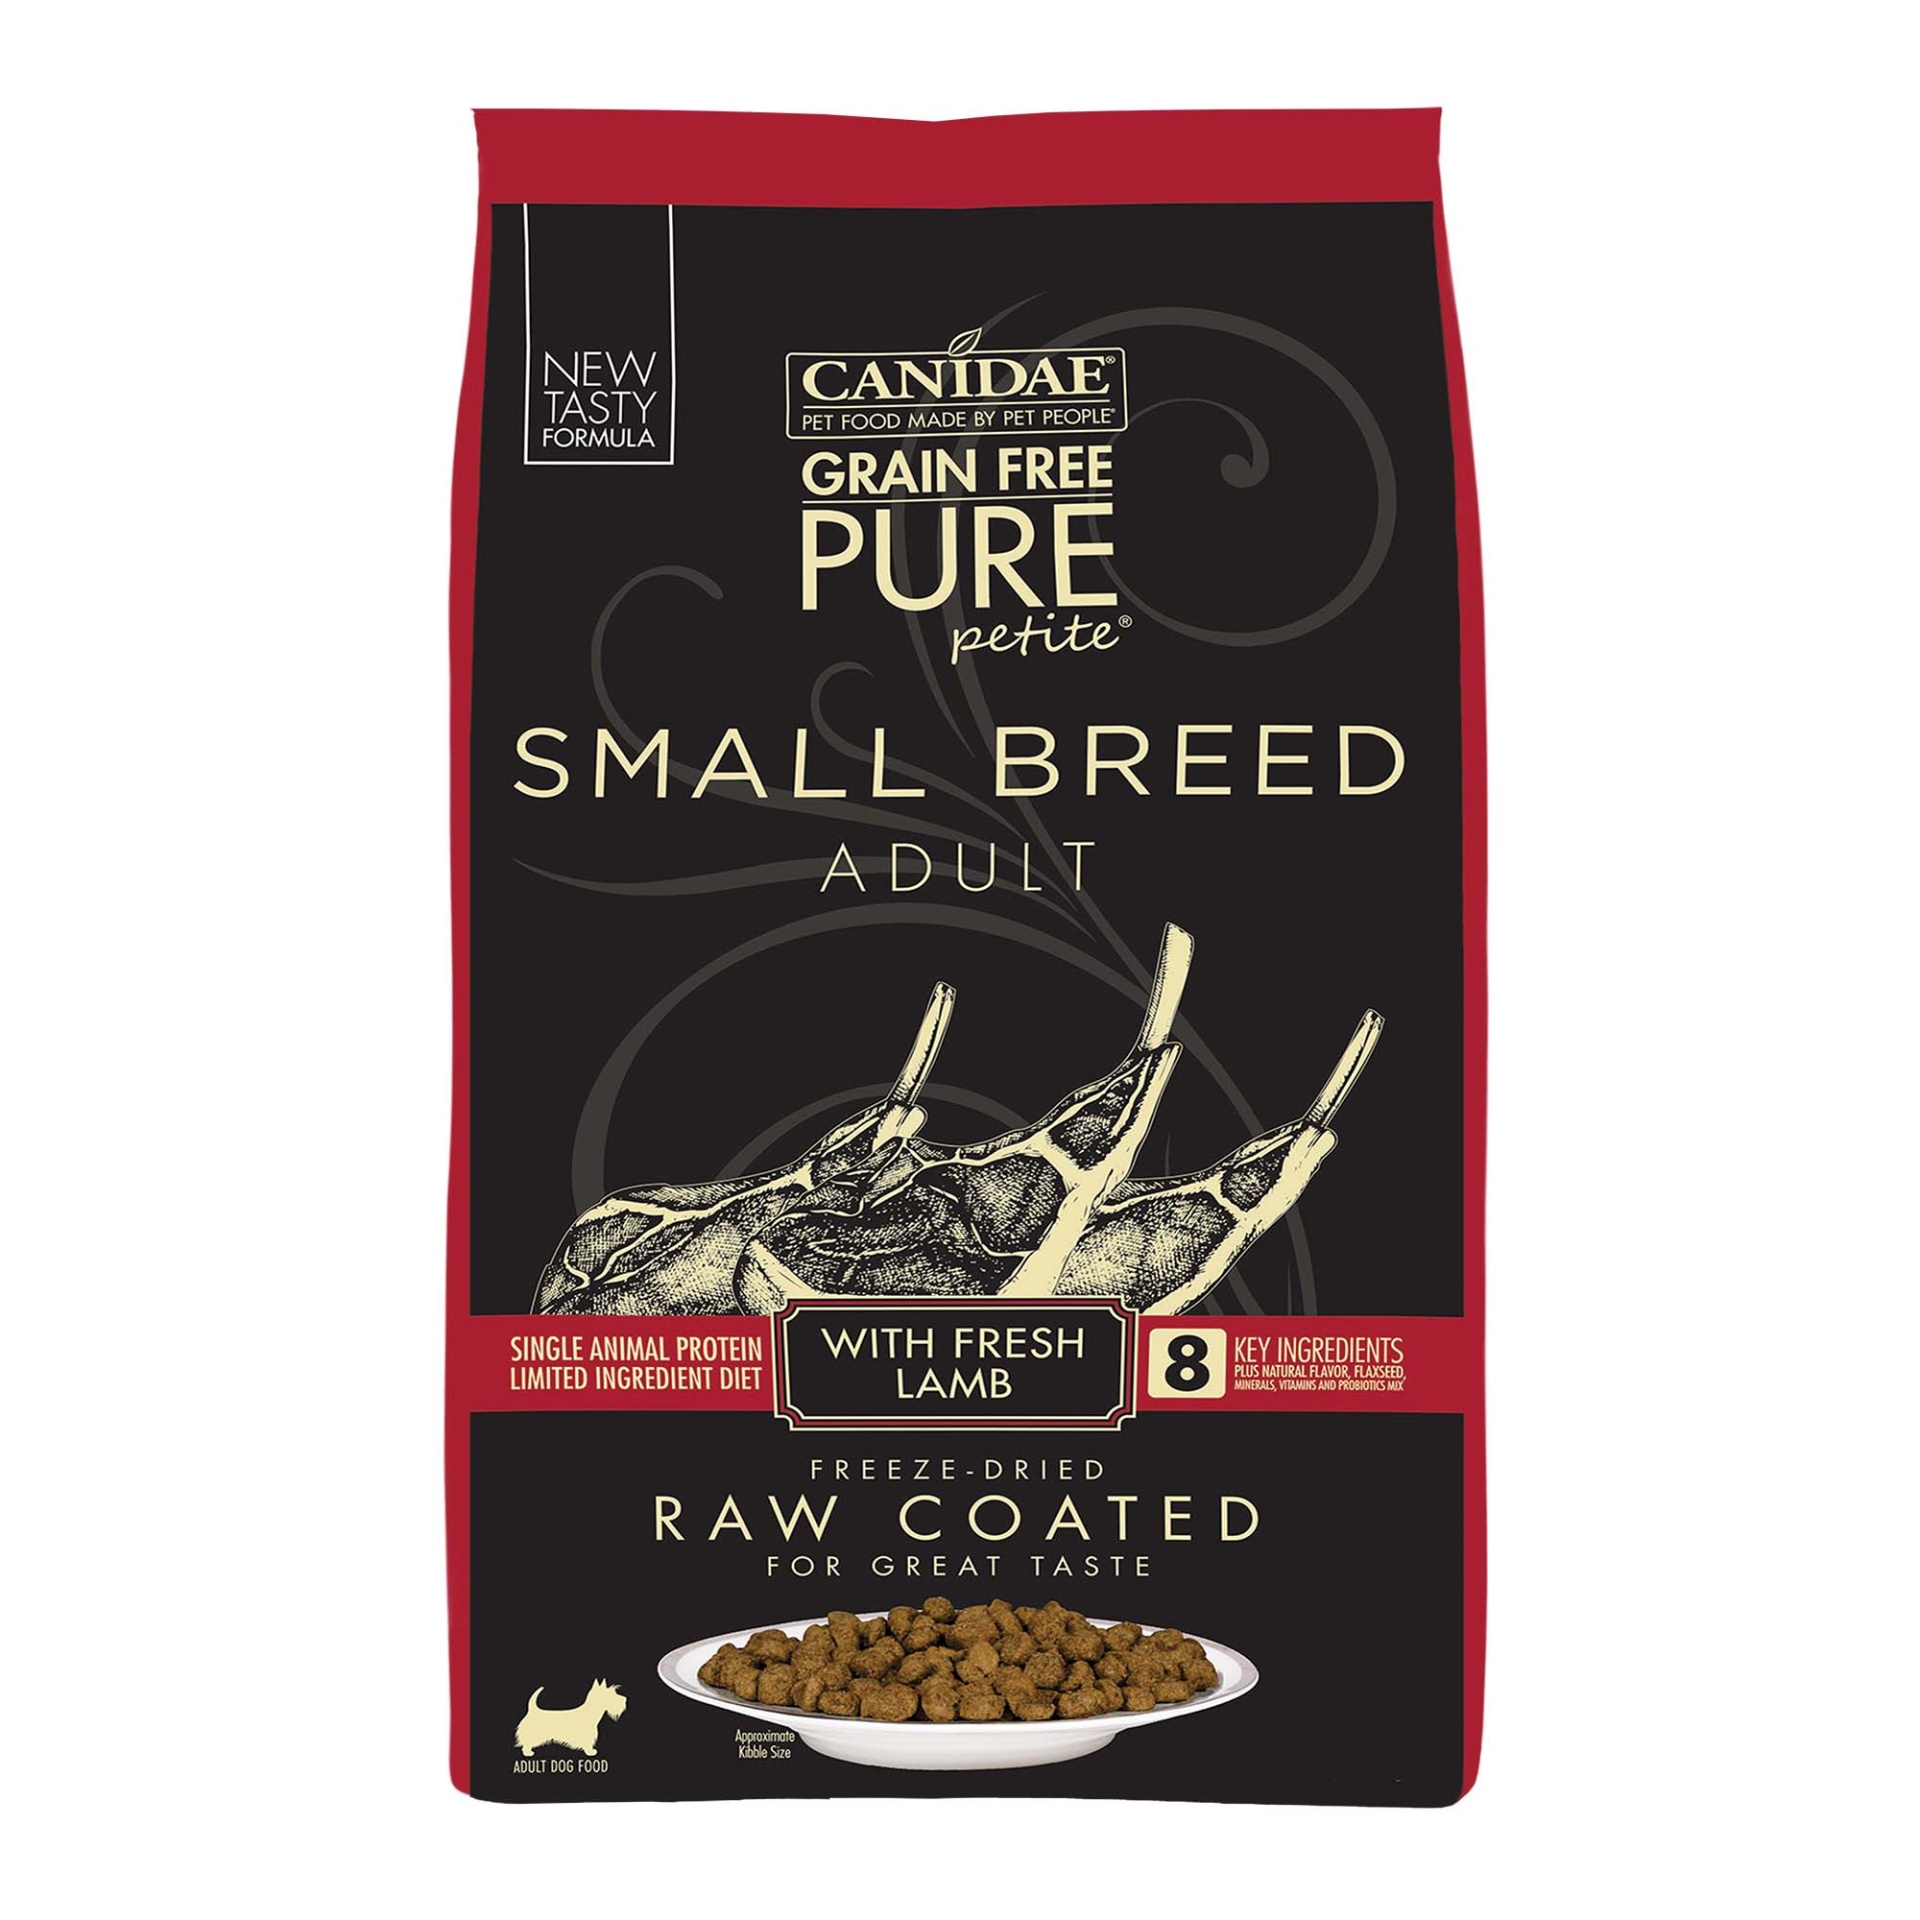 slide 1 of 1, CANIDAE Grain Free PURE Petite Small Breed Dry Dog Food Raw Coated Formula with Lamb, 10 lb